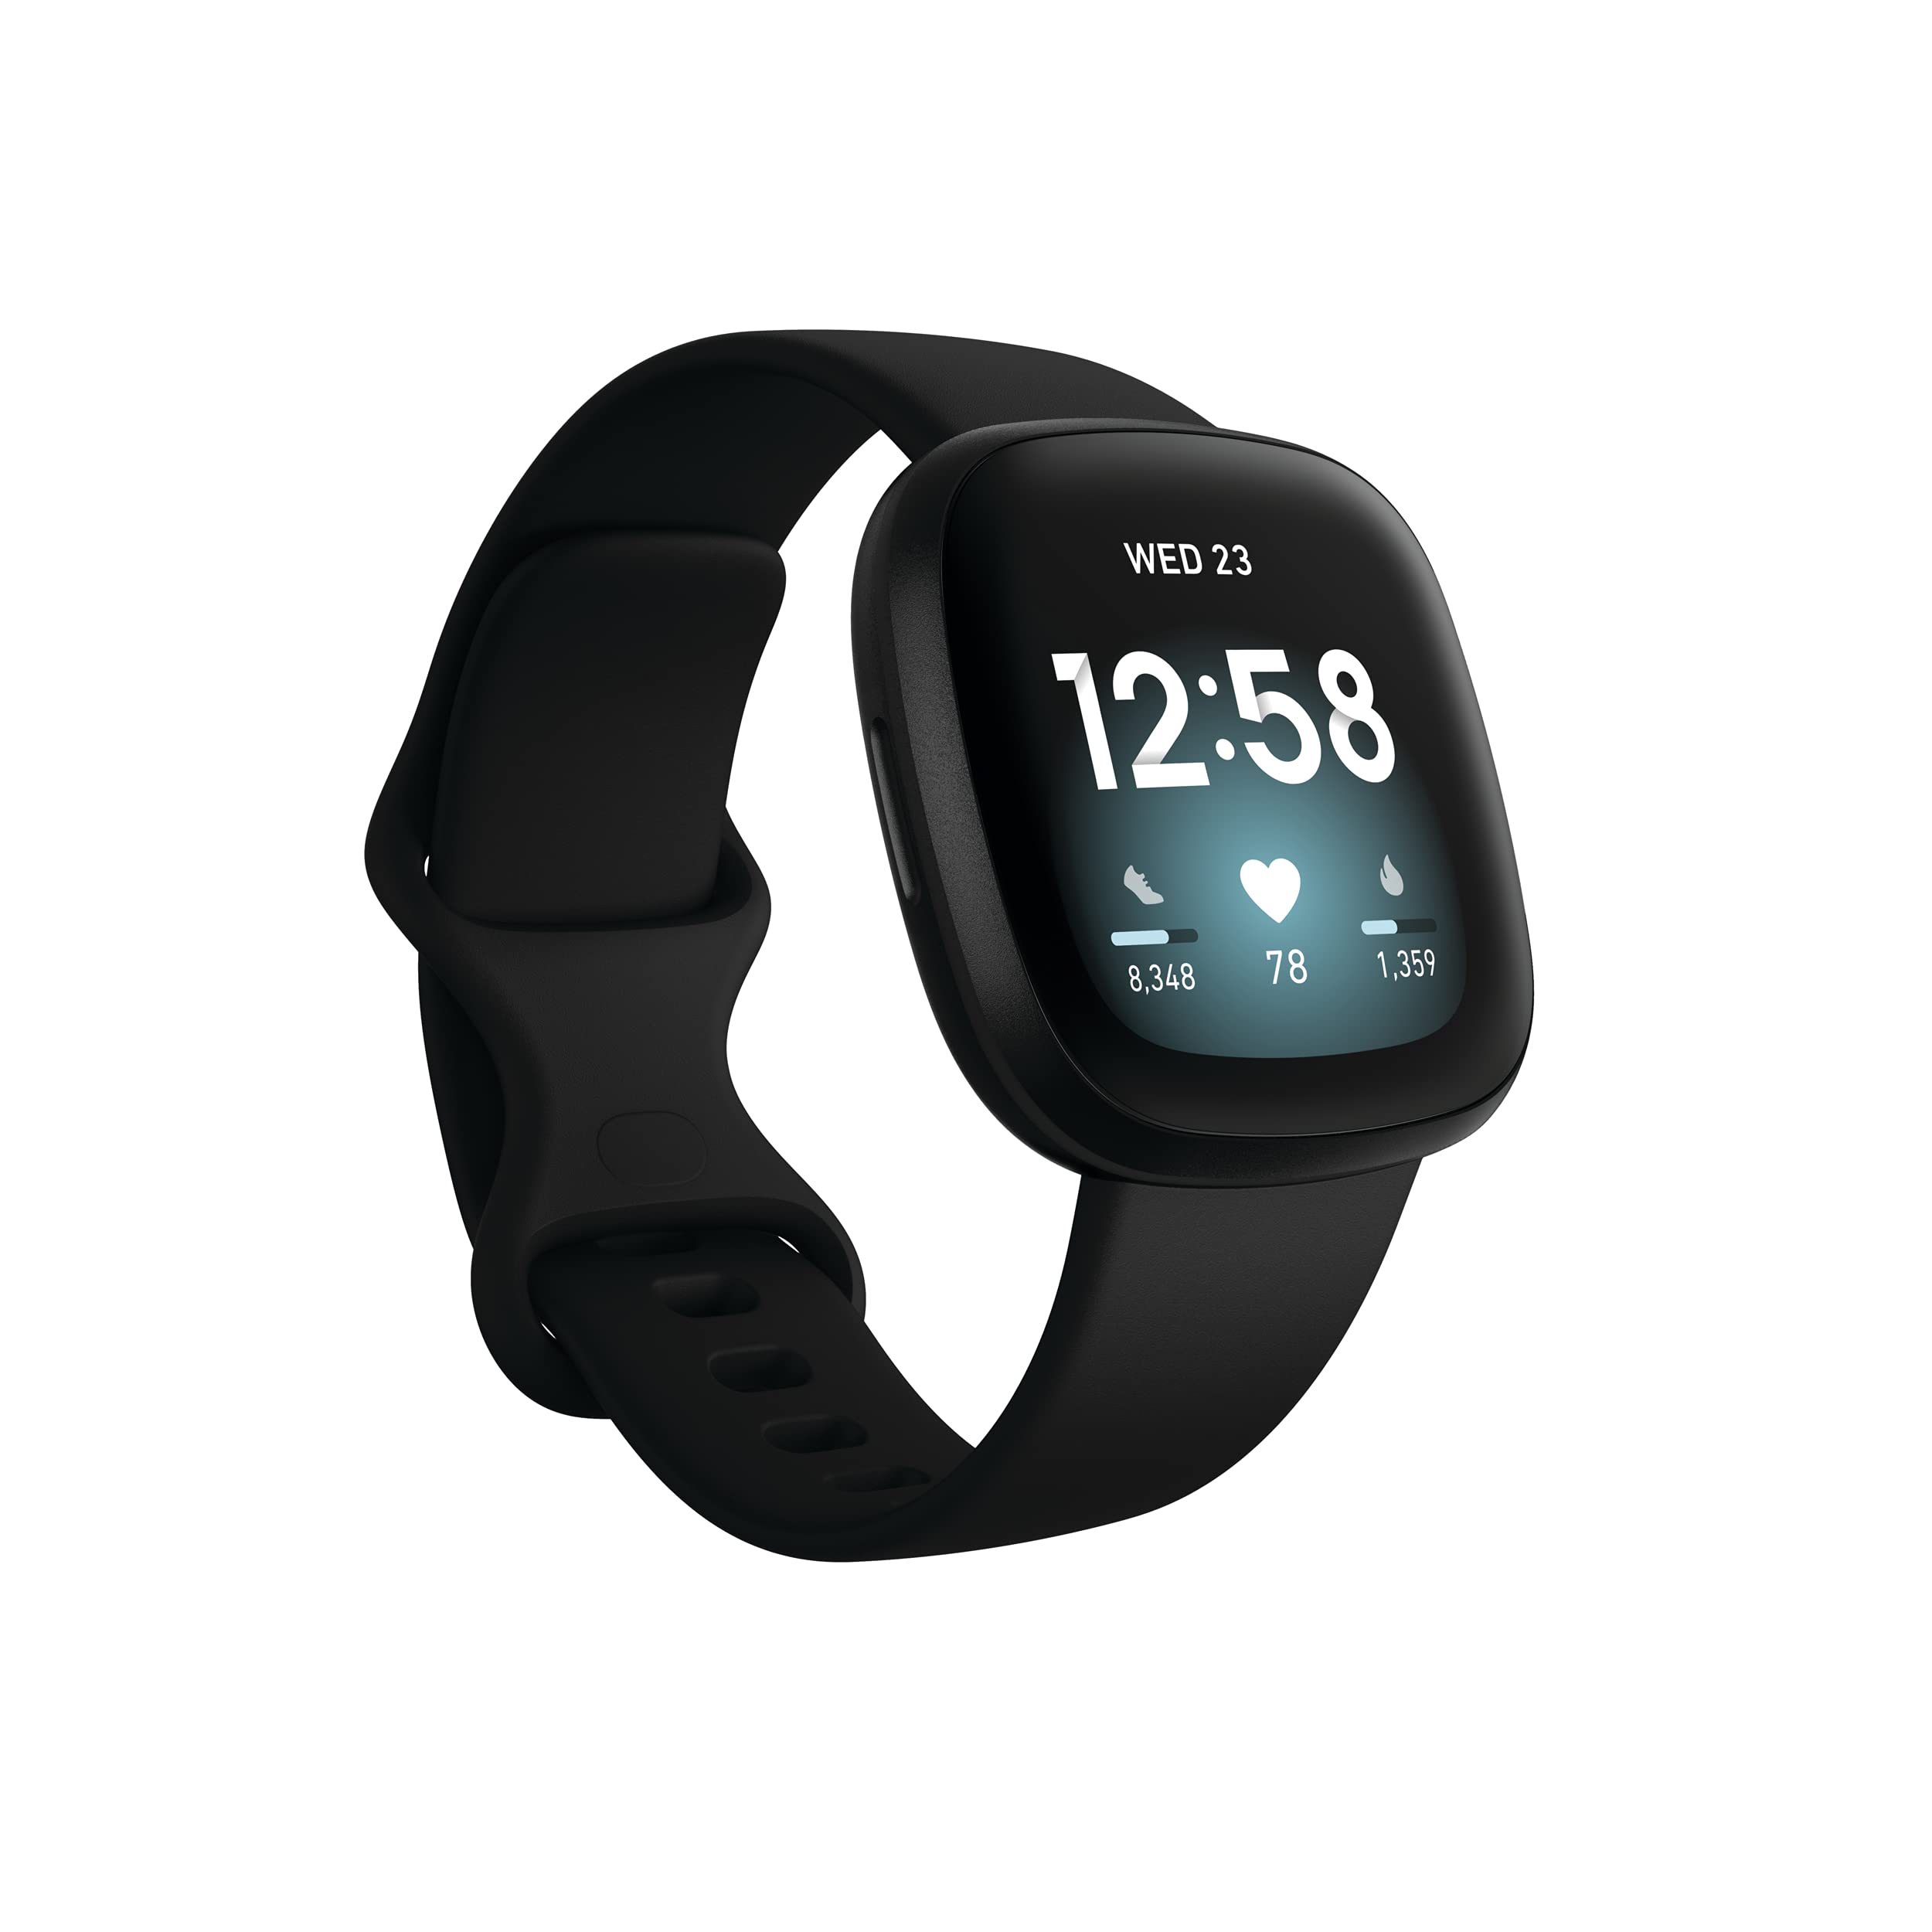 Fitbit Versa 3 Health Fitness Smartwatch with GPS 247 Heart Rate Alexa Built-in 6 Days Battery BlackBlack One Size